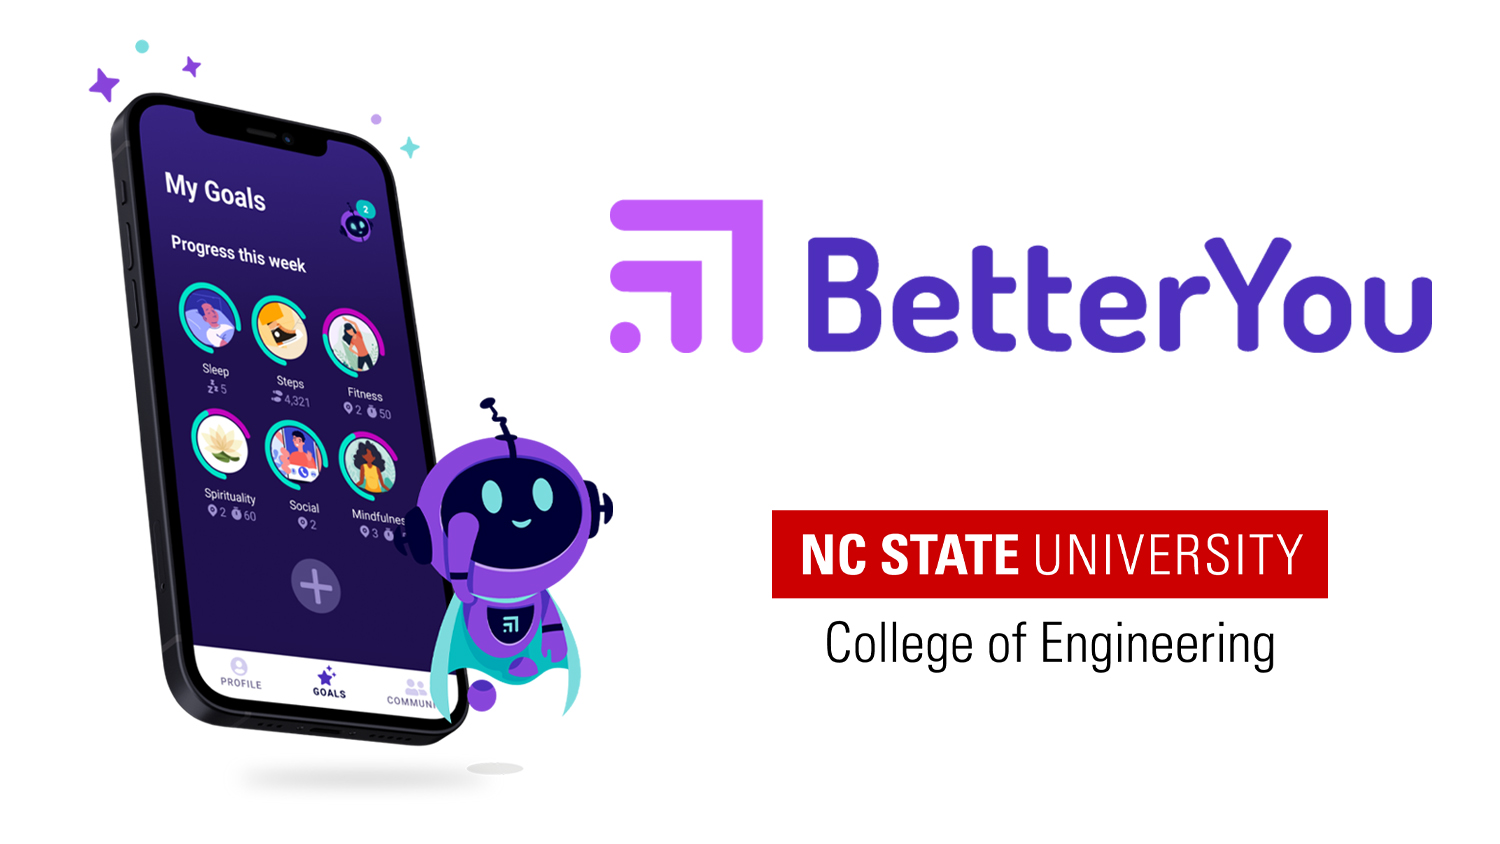 Purple BetterYou logo with the red white and black logo of NC State University College of Engineering, all on a white background. To the left of the logos there is a mobile phone showing a BetterYou app screen and company mascot next to the phone.